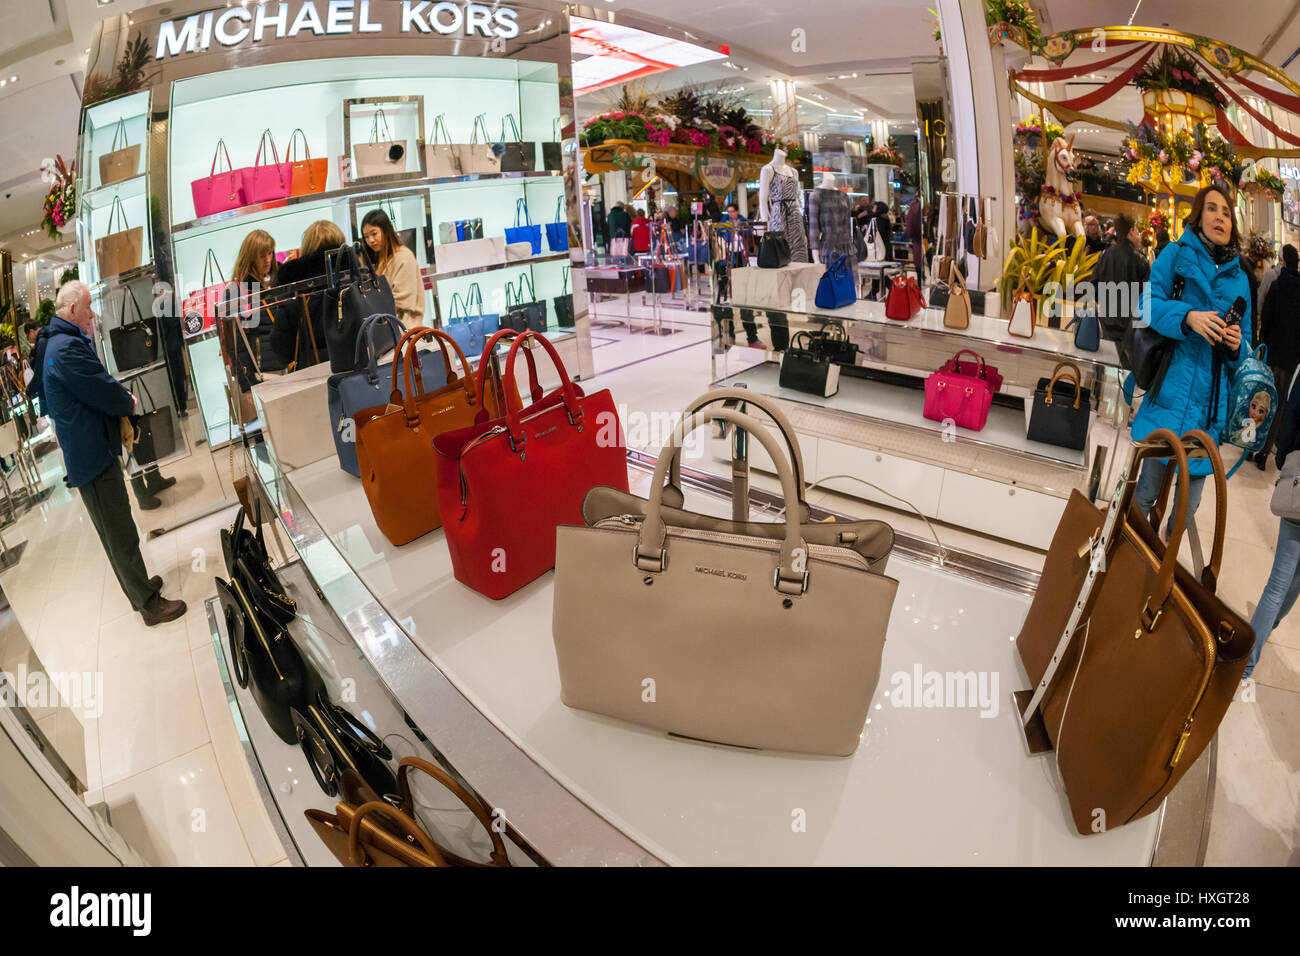 Shoppers browse Michael Kors handbags in the Macy's Herald Square flagship  store on Sunday, March 26, 2017. (© Richard B. Levine Stock Photo - Alamy